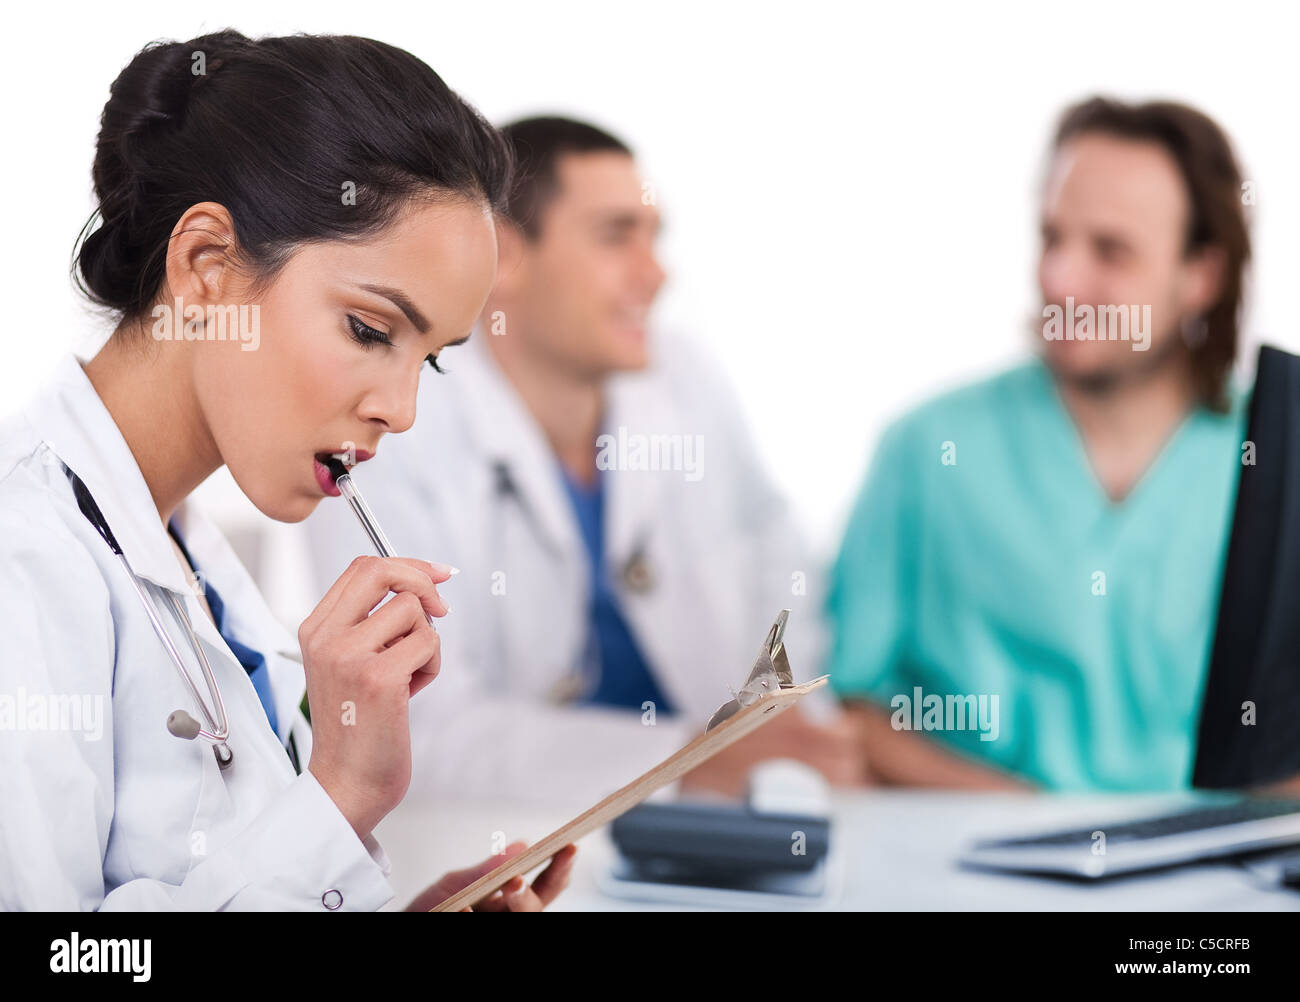 Young asian doctor thinking with the pen, others blurred behind over white background Stock Photo